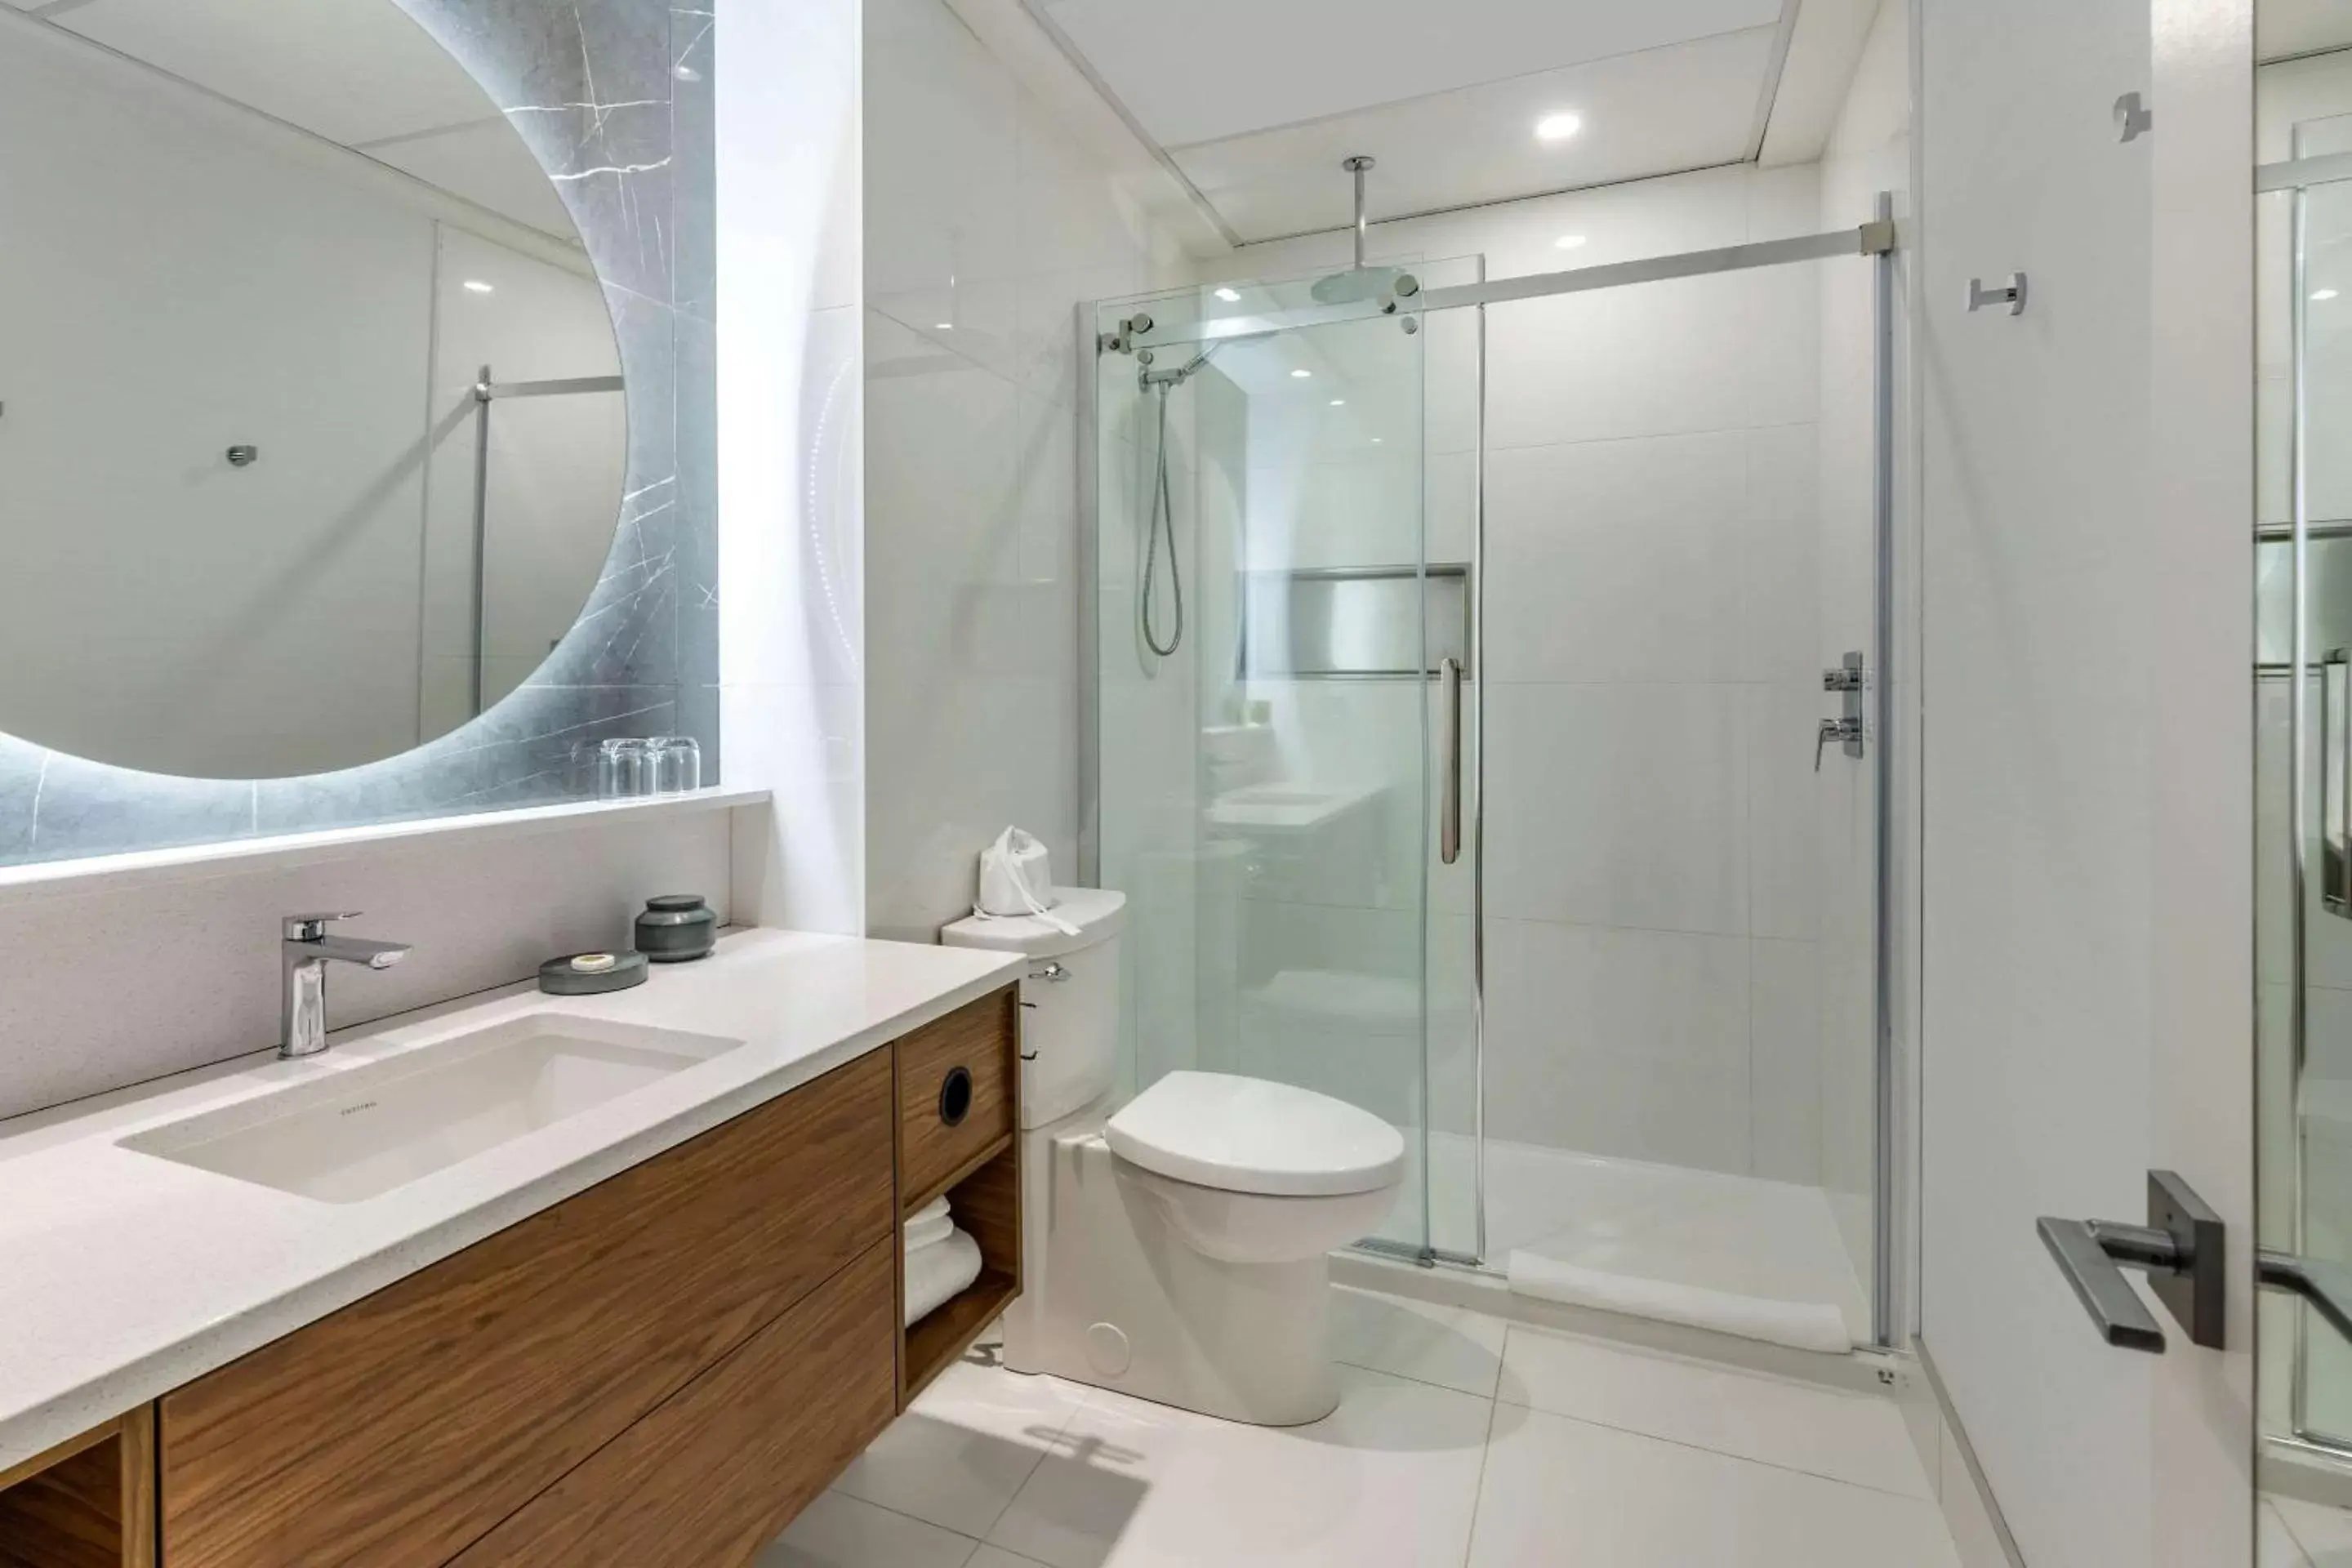 Bathroom in Hotel Royal William, Ascend Hotel Collection